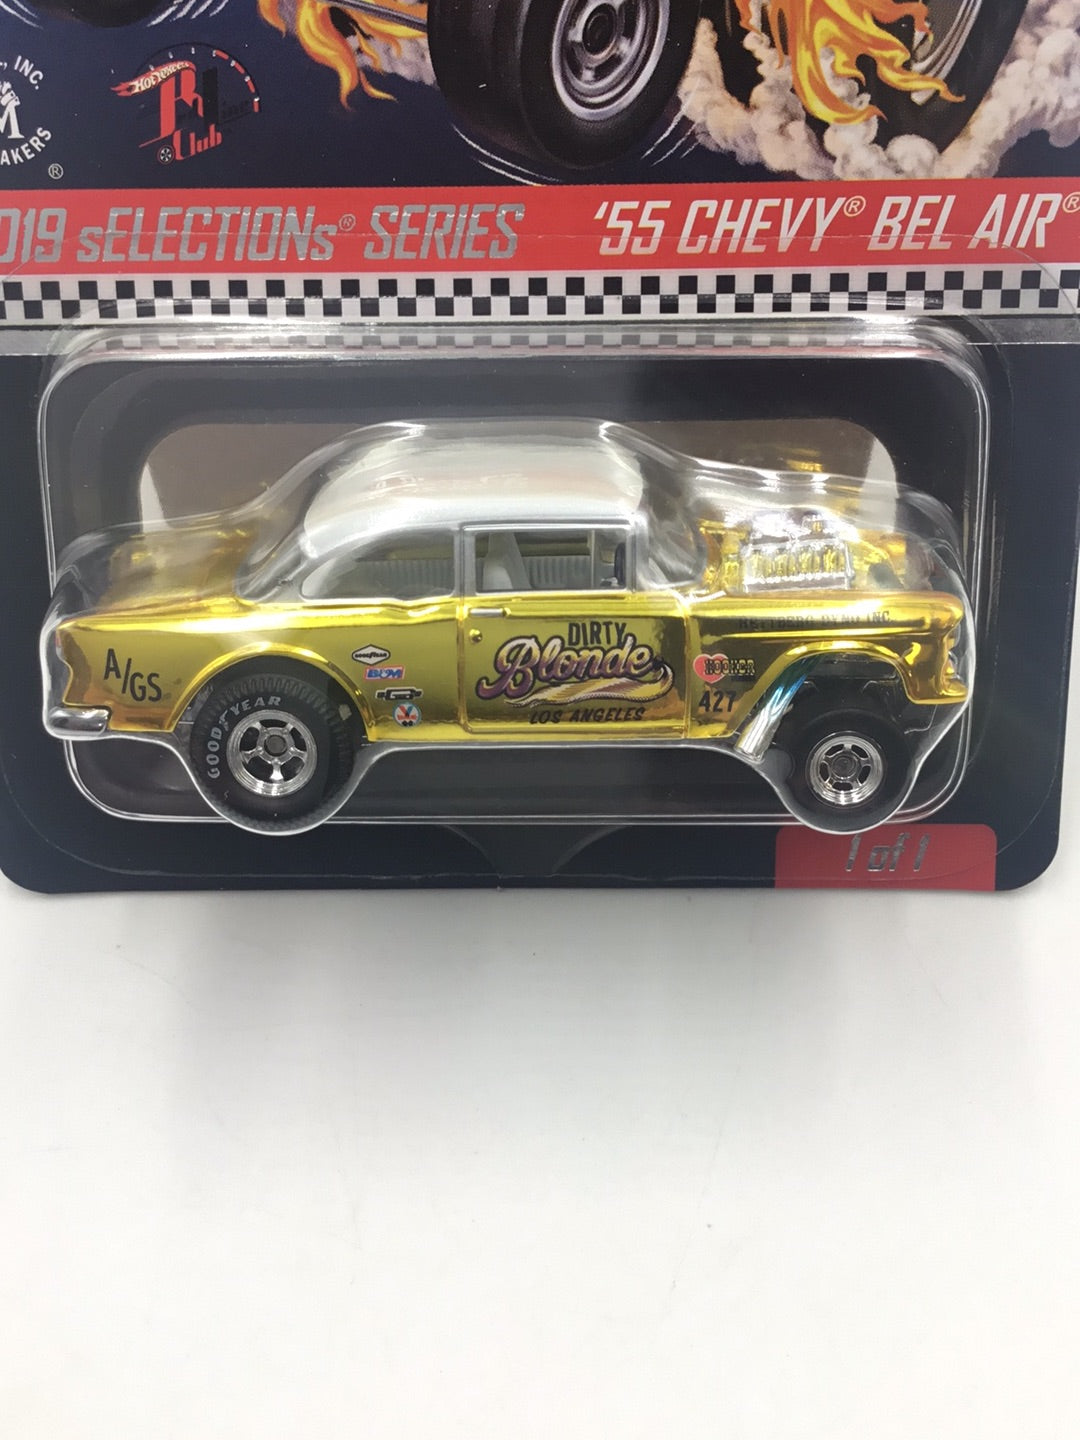 Hot wheels 2019 Selections Series redline club 55 Chevy Bel Air Gasser with protector